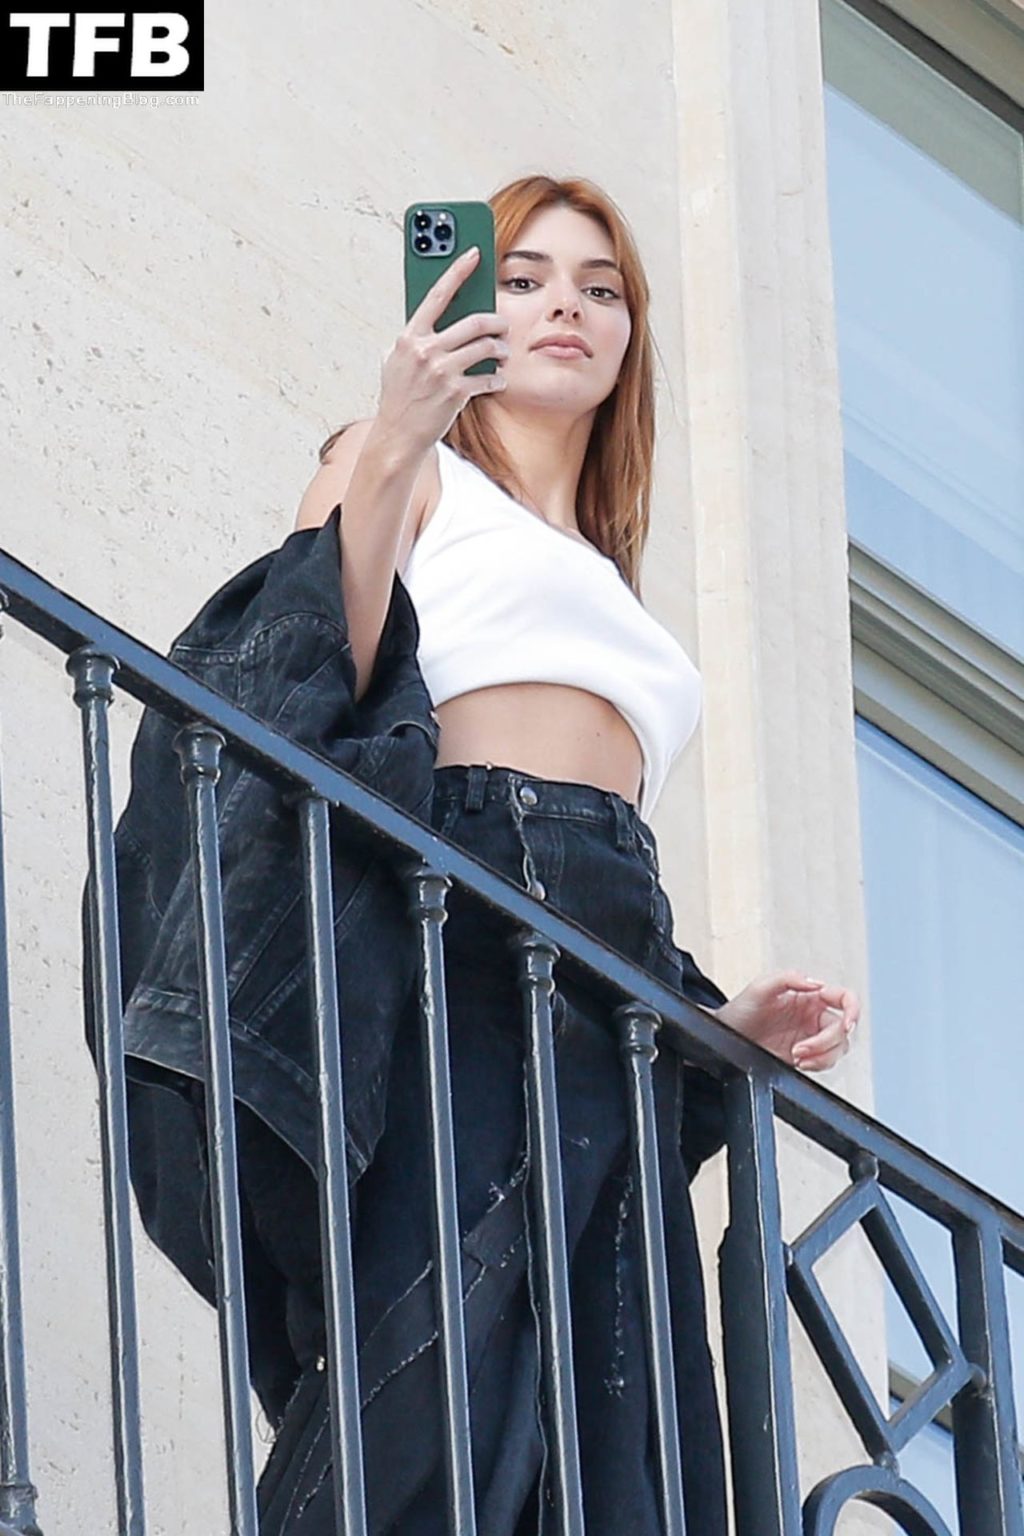 Kendall Jenner Braless The Fappening Blog 137 1024x1536 - Braless Kendall Jenner Poses in Paris (141 Photos)